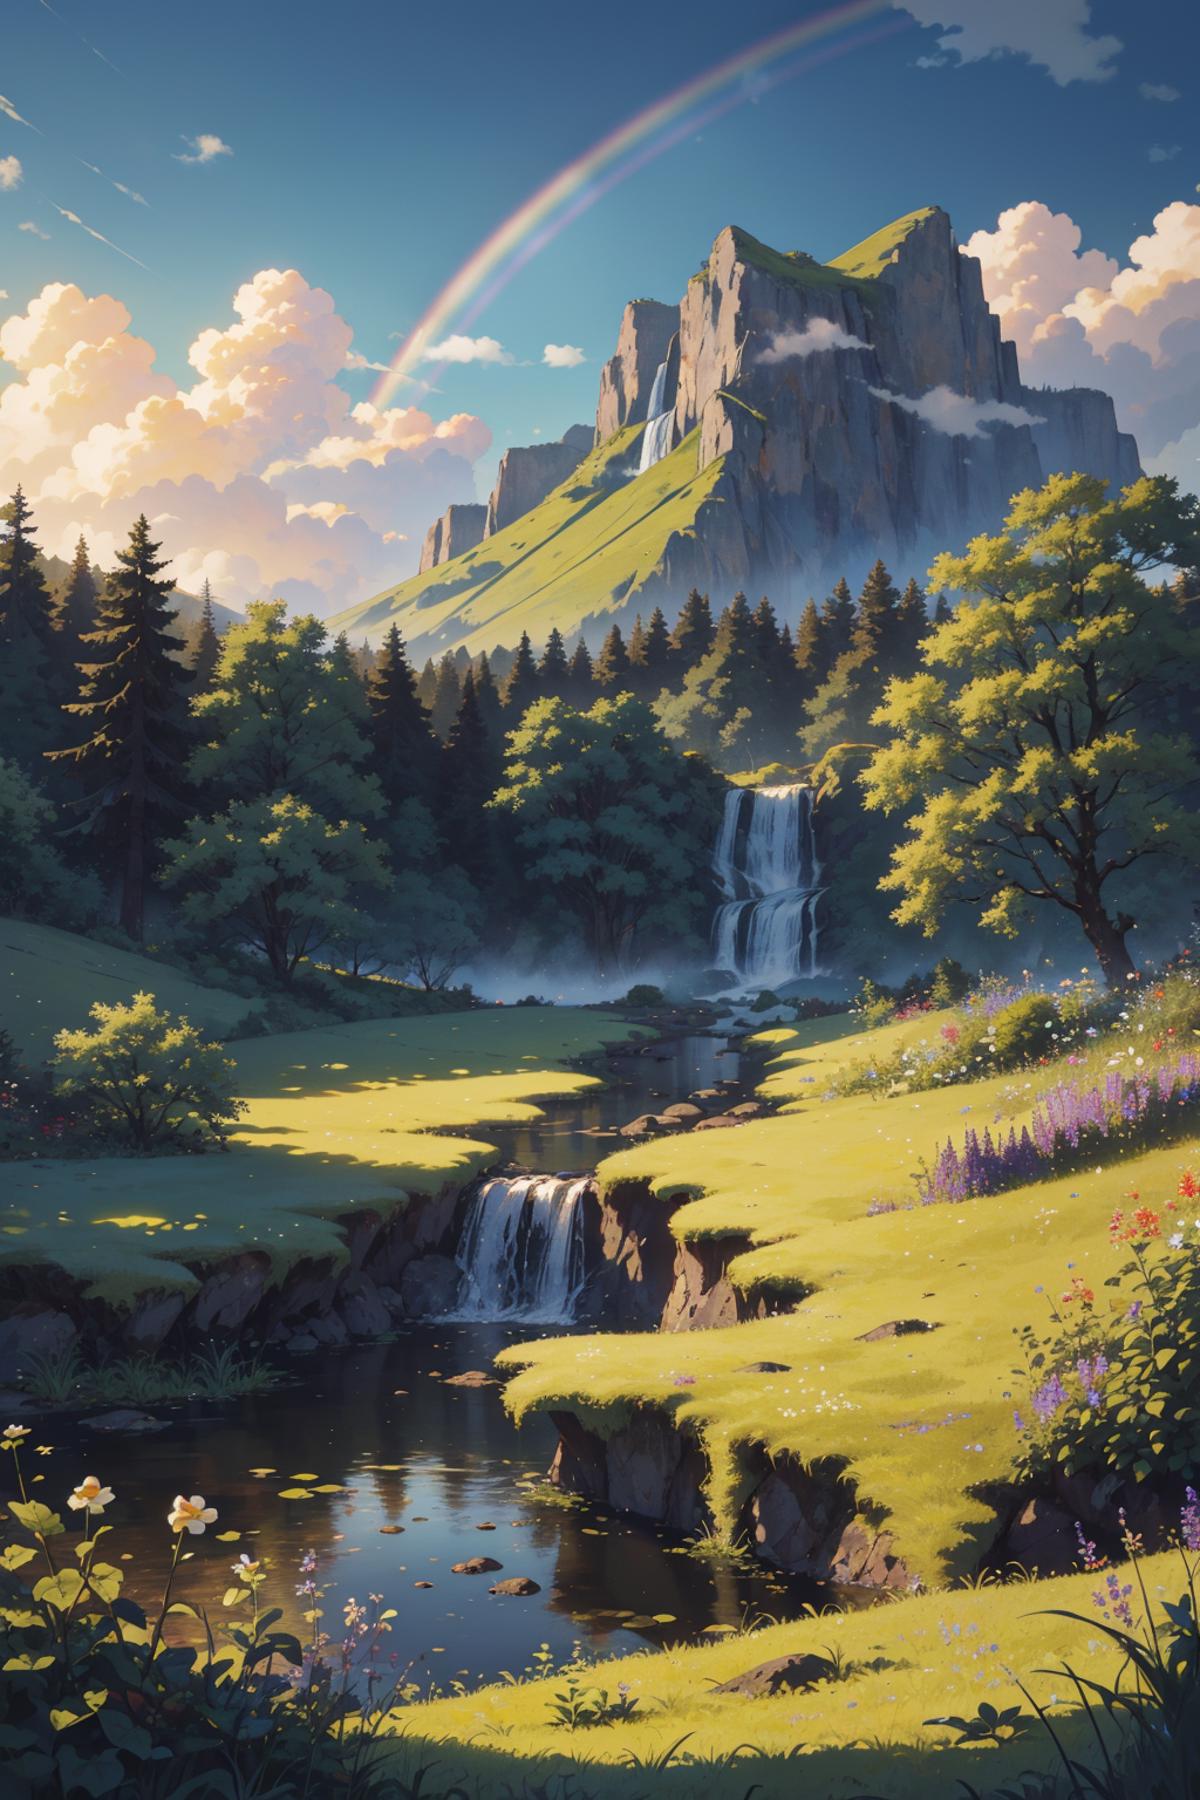 A serene mountain landscape with a waterfall and lush greenery.